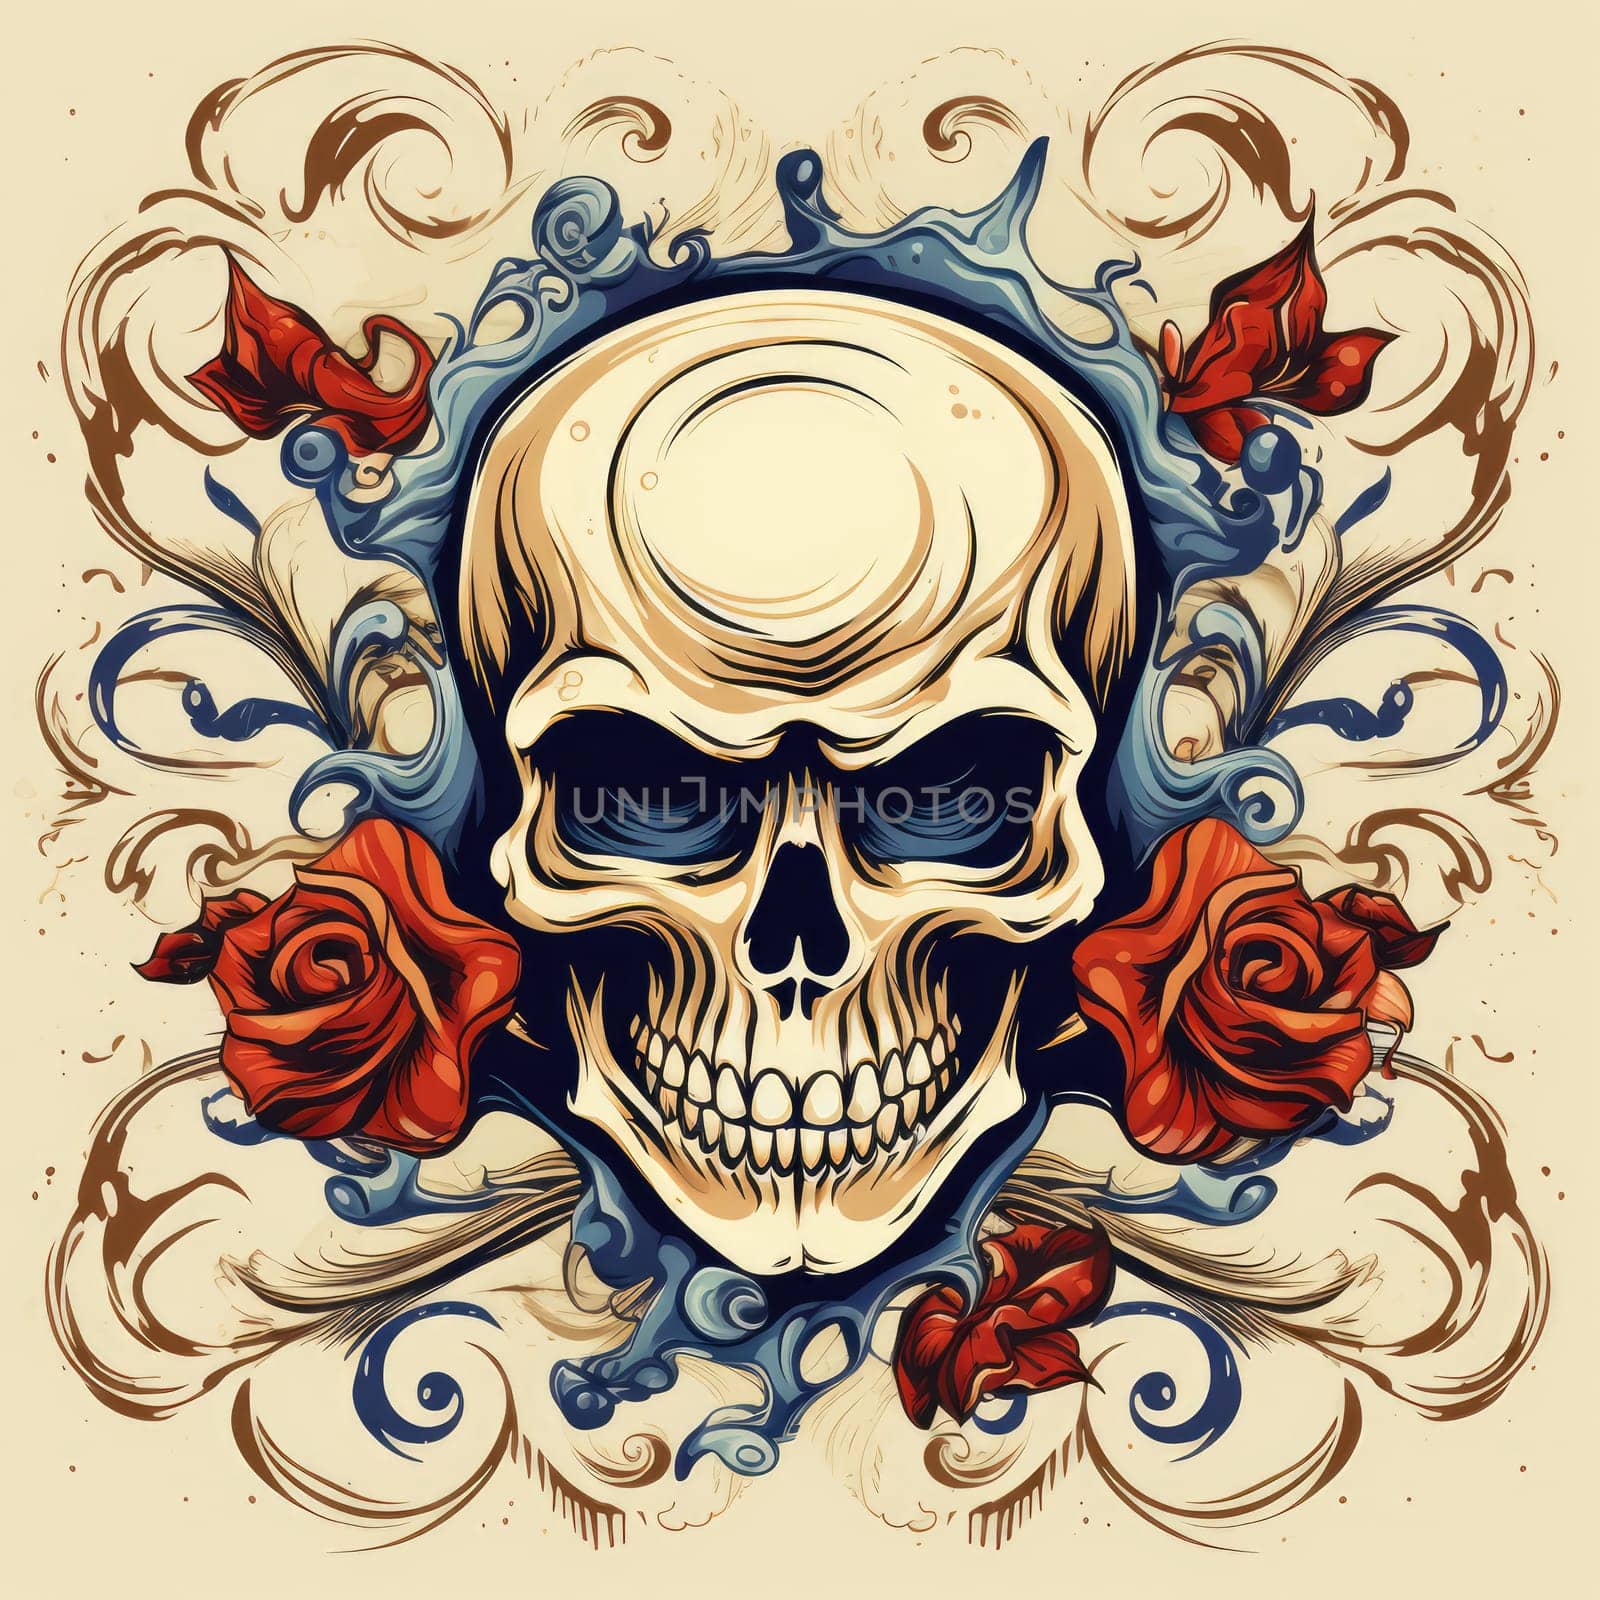 The eternal cycle of life and death. A skull surrounded by flowers as a symbol of the continuous cycle of birth, death and rebirth. Template for print, sticker, poster, etc.